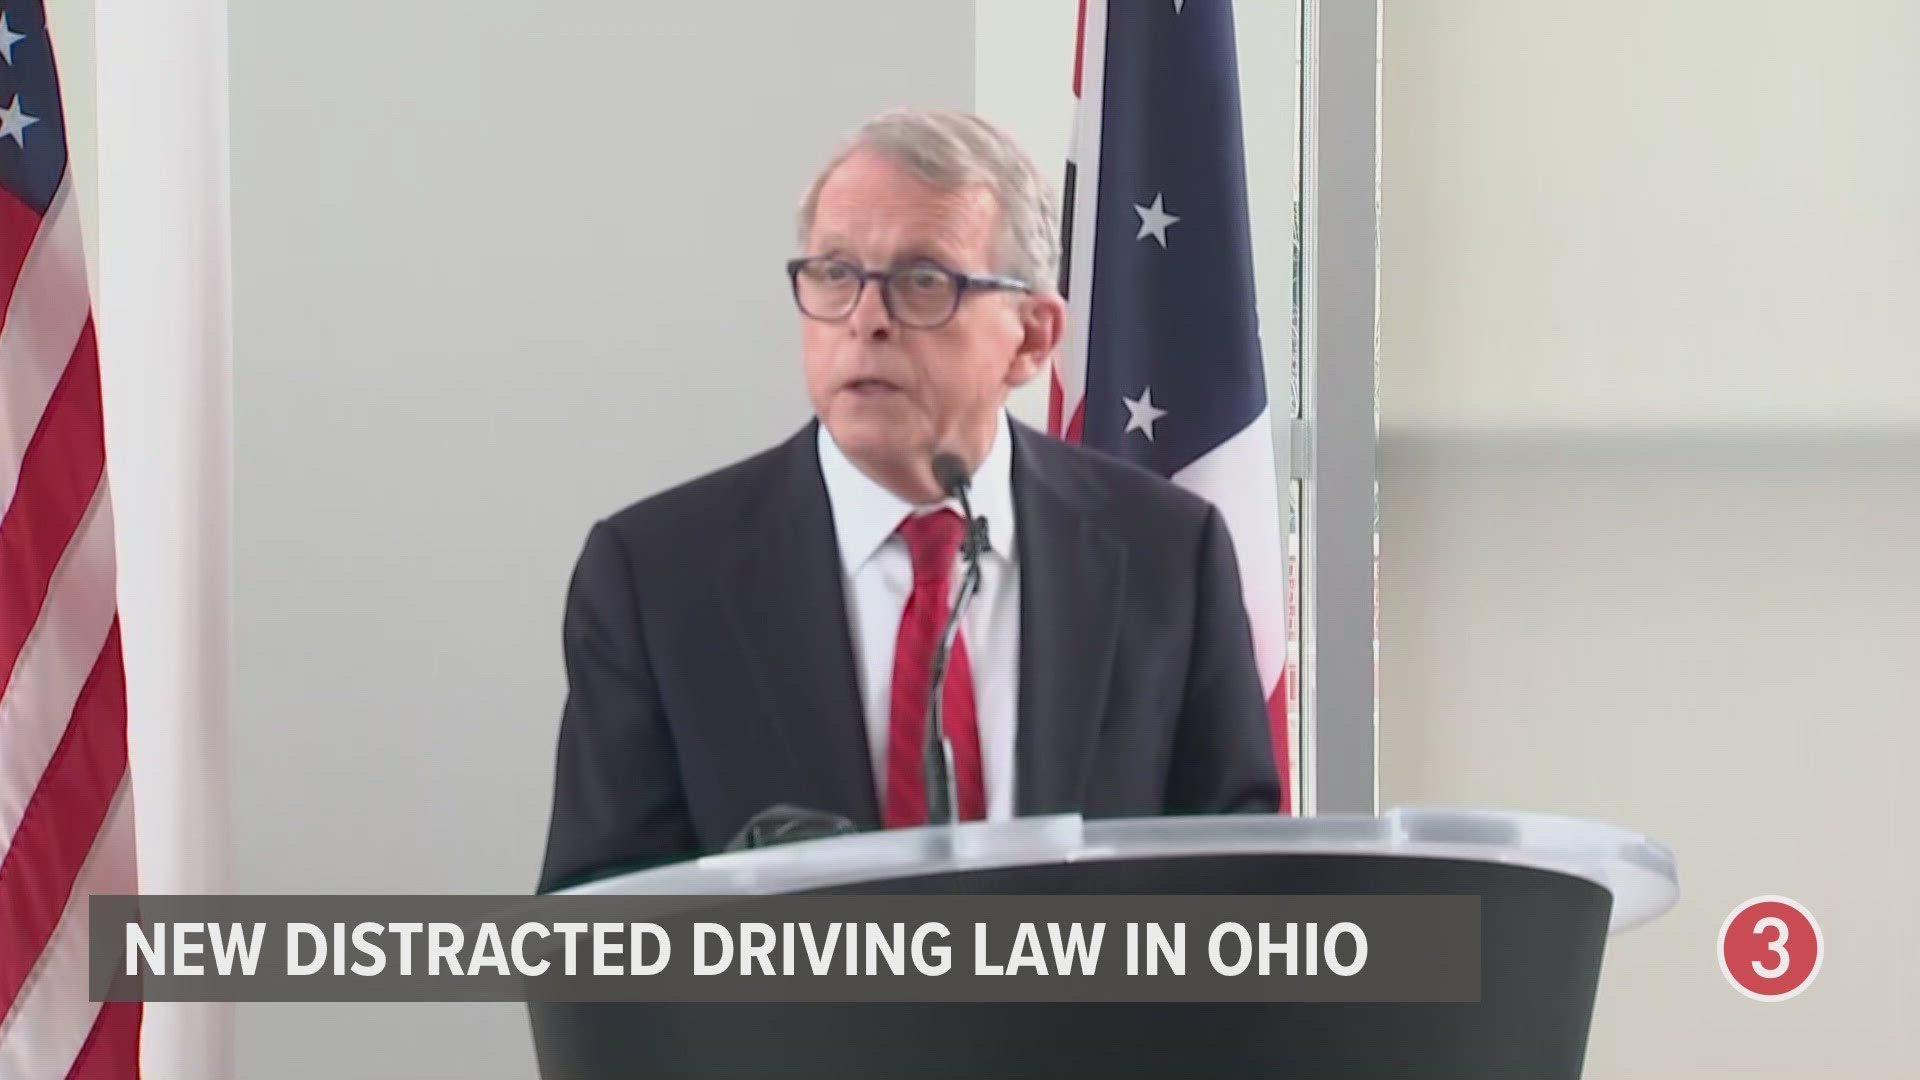 New distracted driving law in Ohio Gov. Mike DeWine gives update